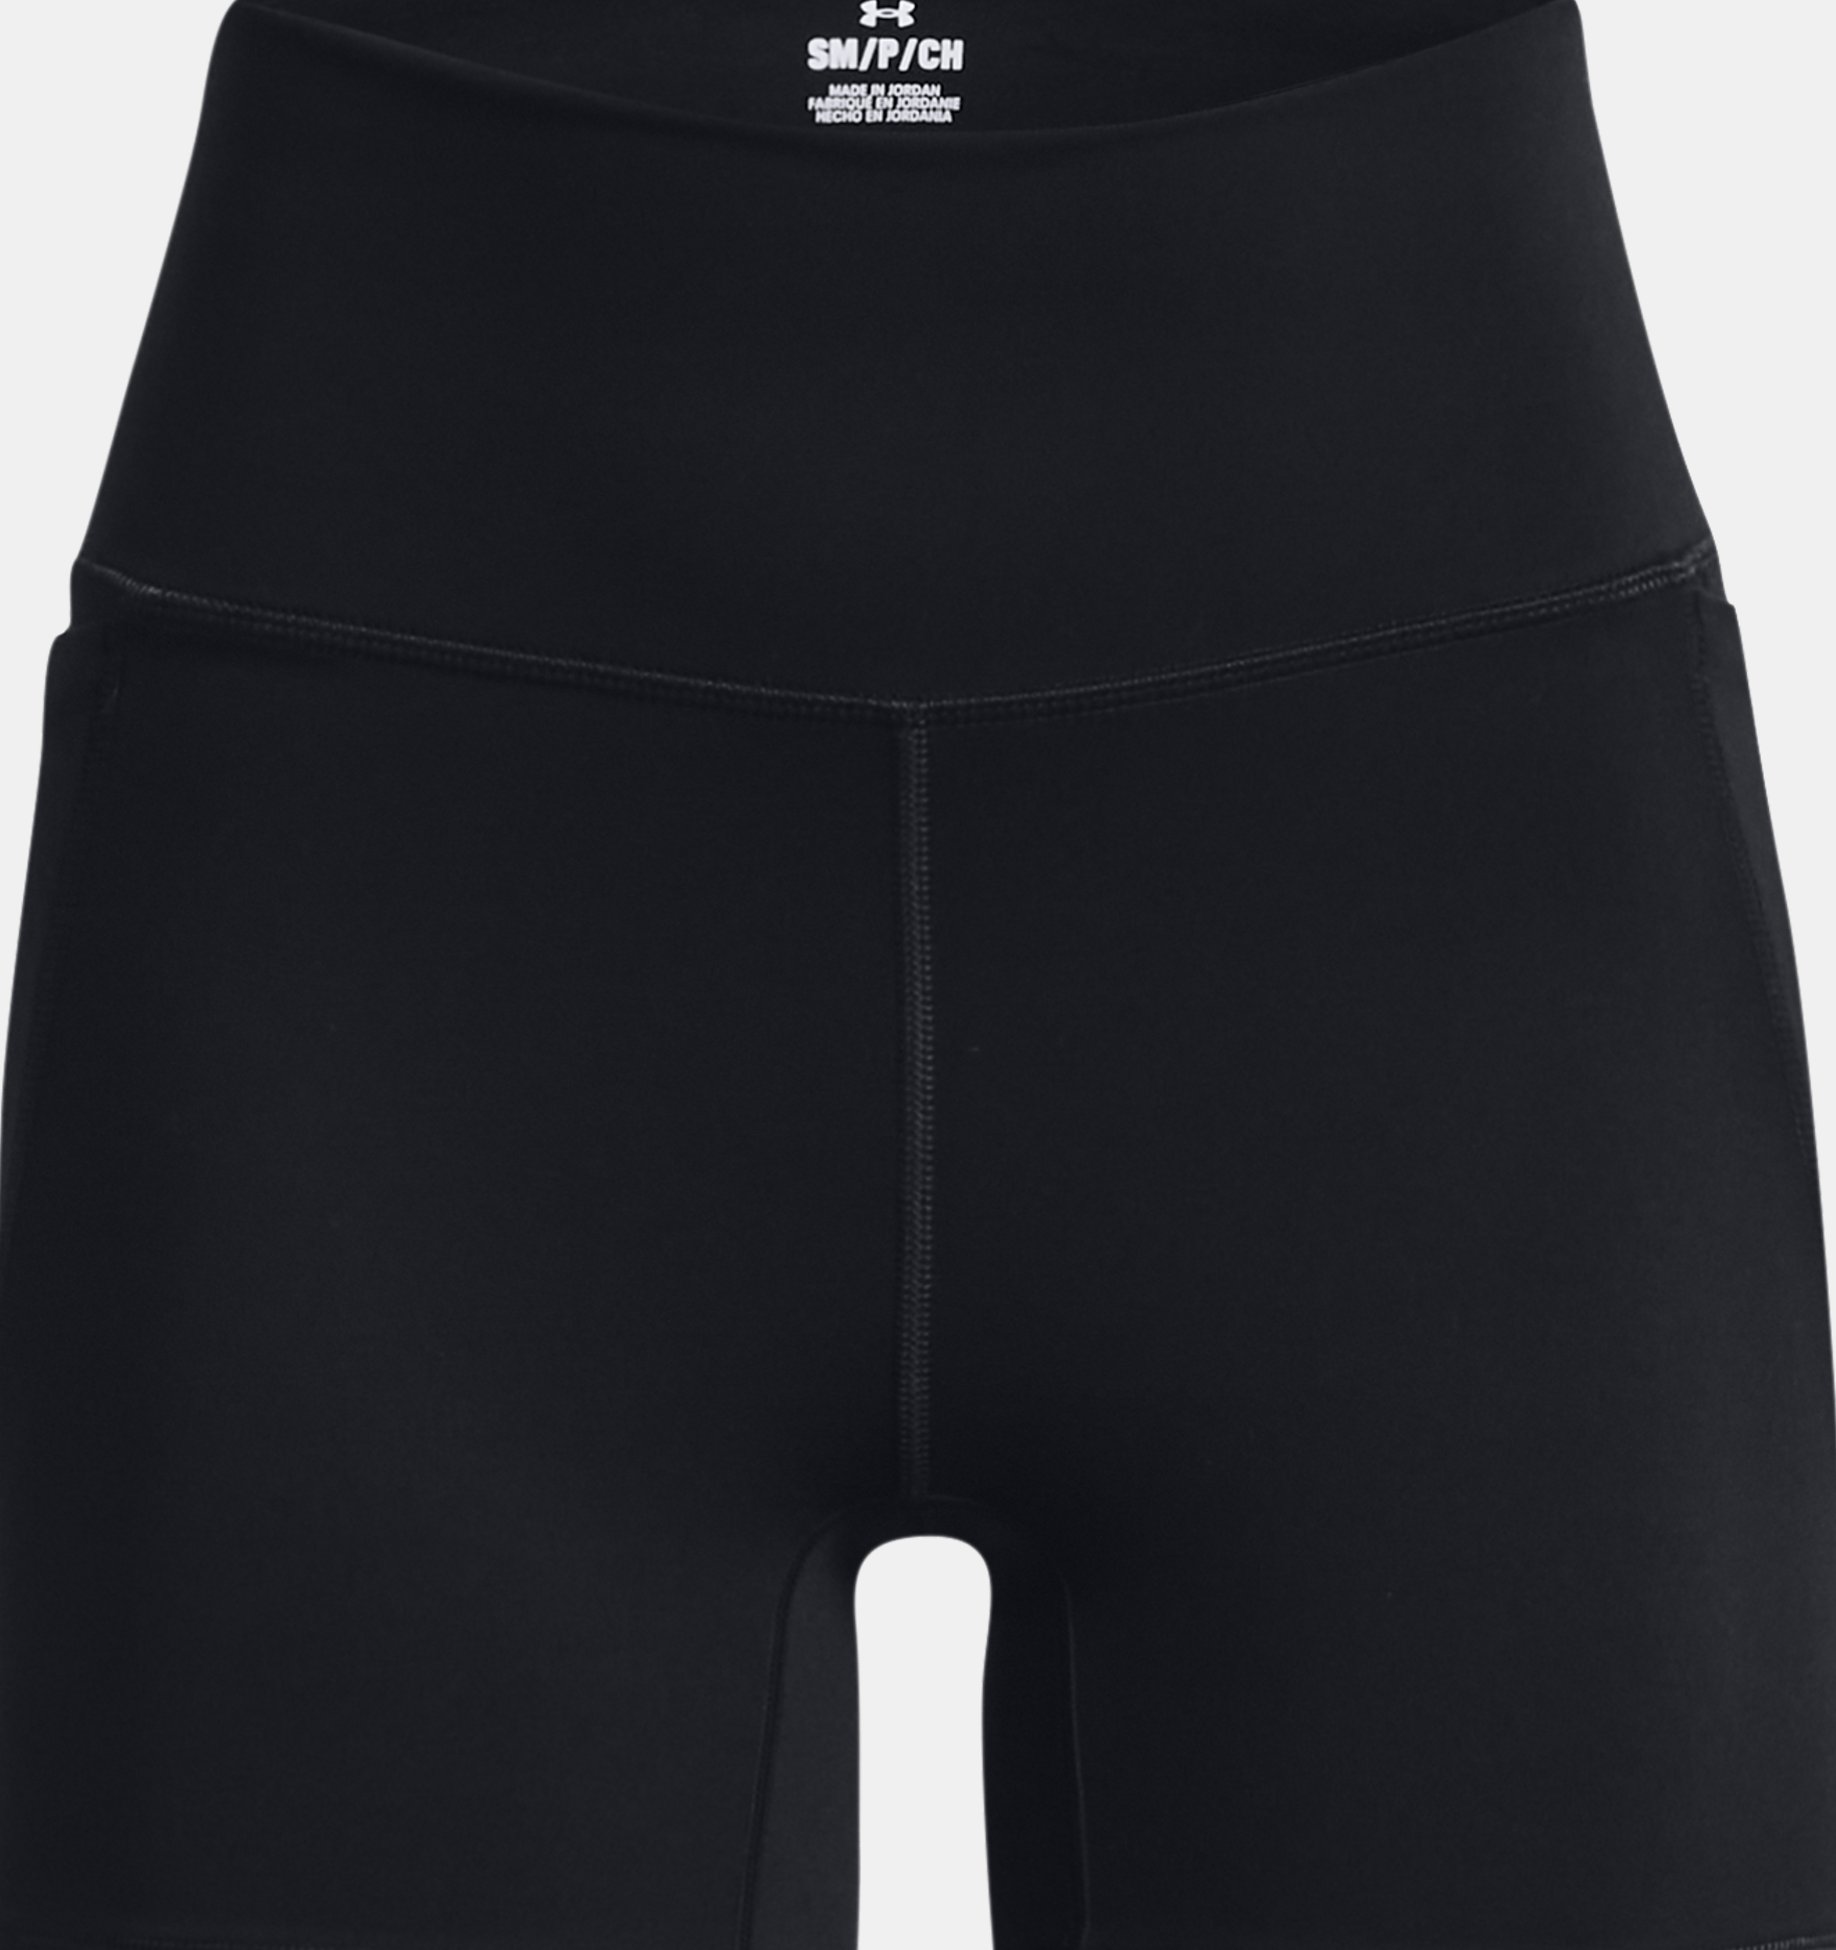 Women's UA Meridian Middy Shorts | Under Armour